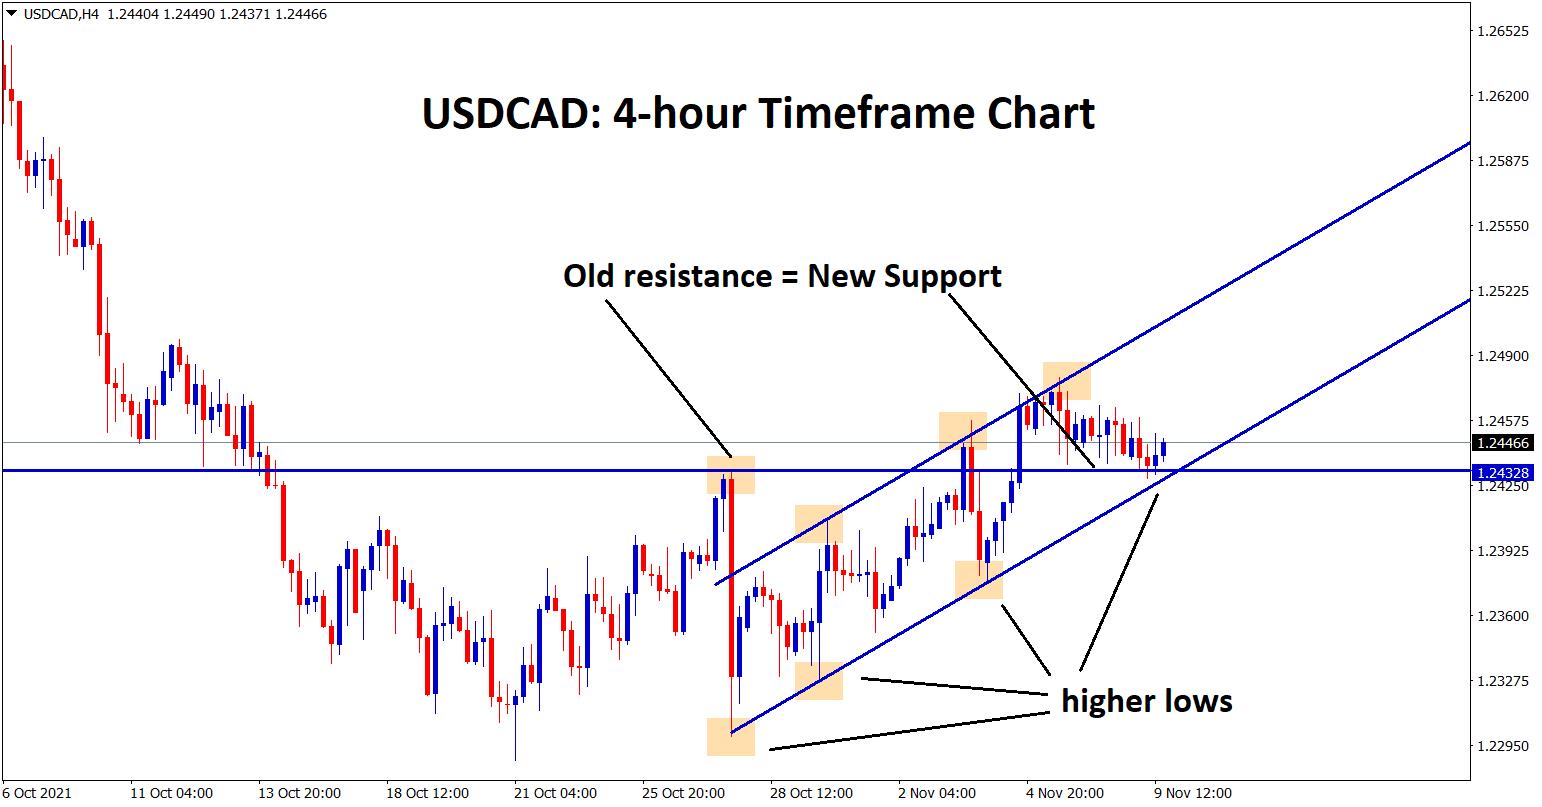 USDCAD price is standing exactly at the higher low of the uptrend line and the new support level